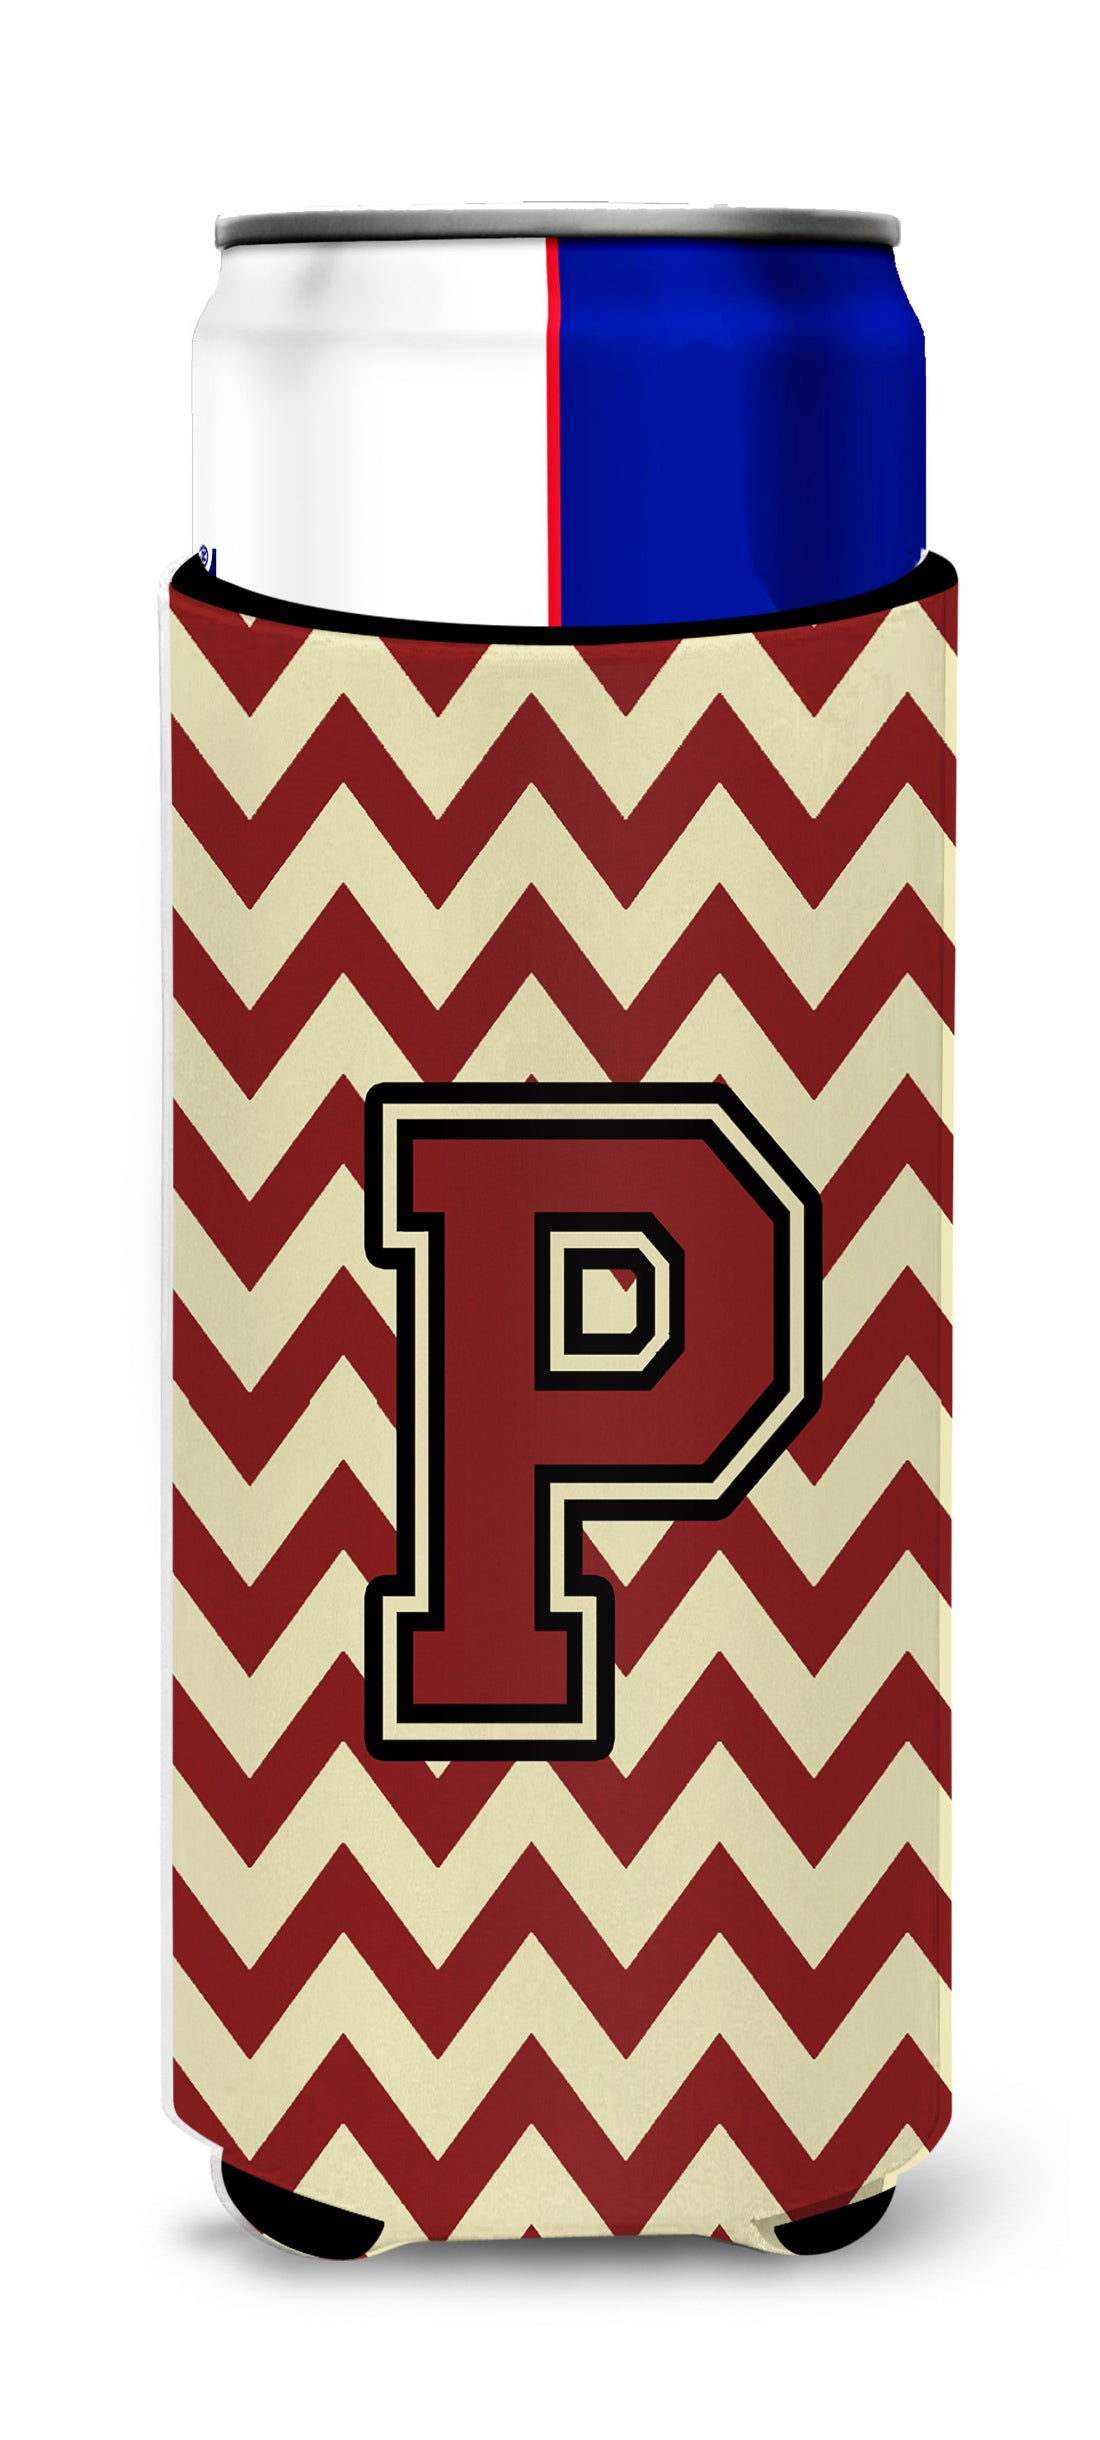 Letter P Chevron Maroon and Gold Ultra Beverage Insulators for slim cans CJ1061-PMUK